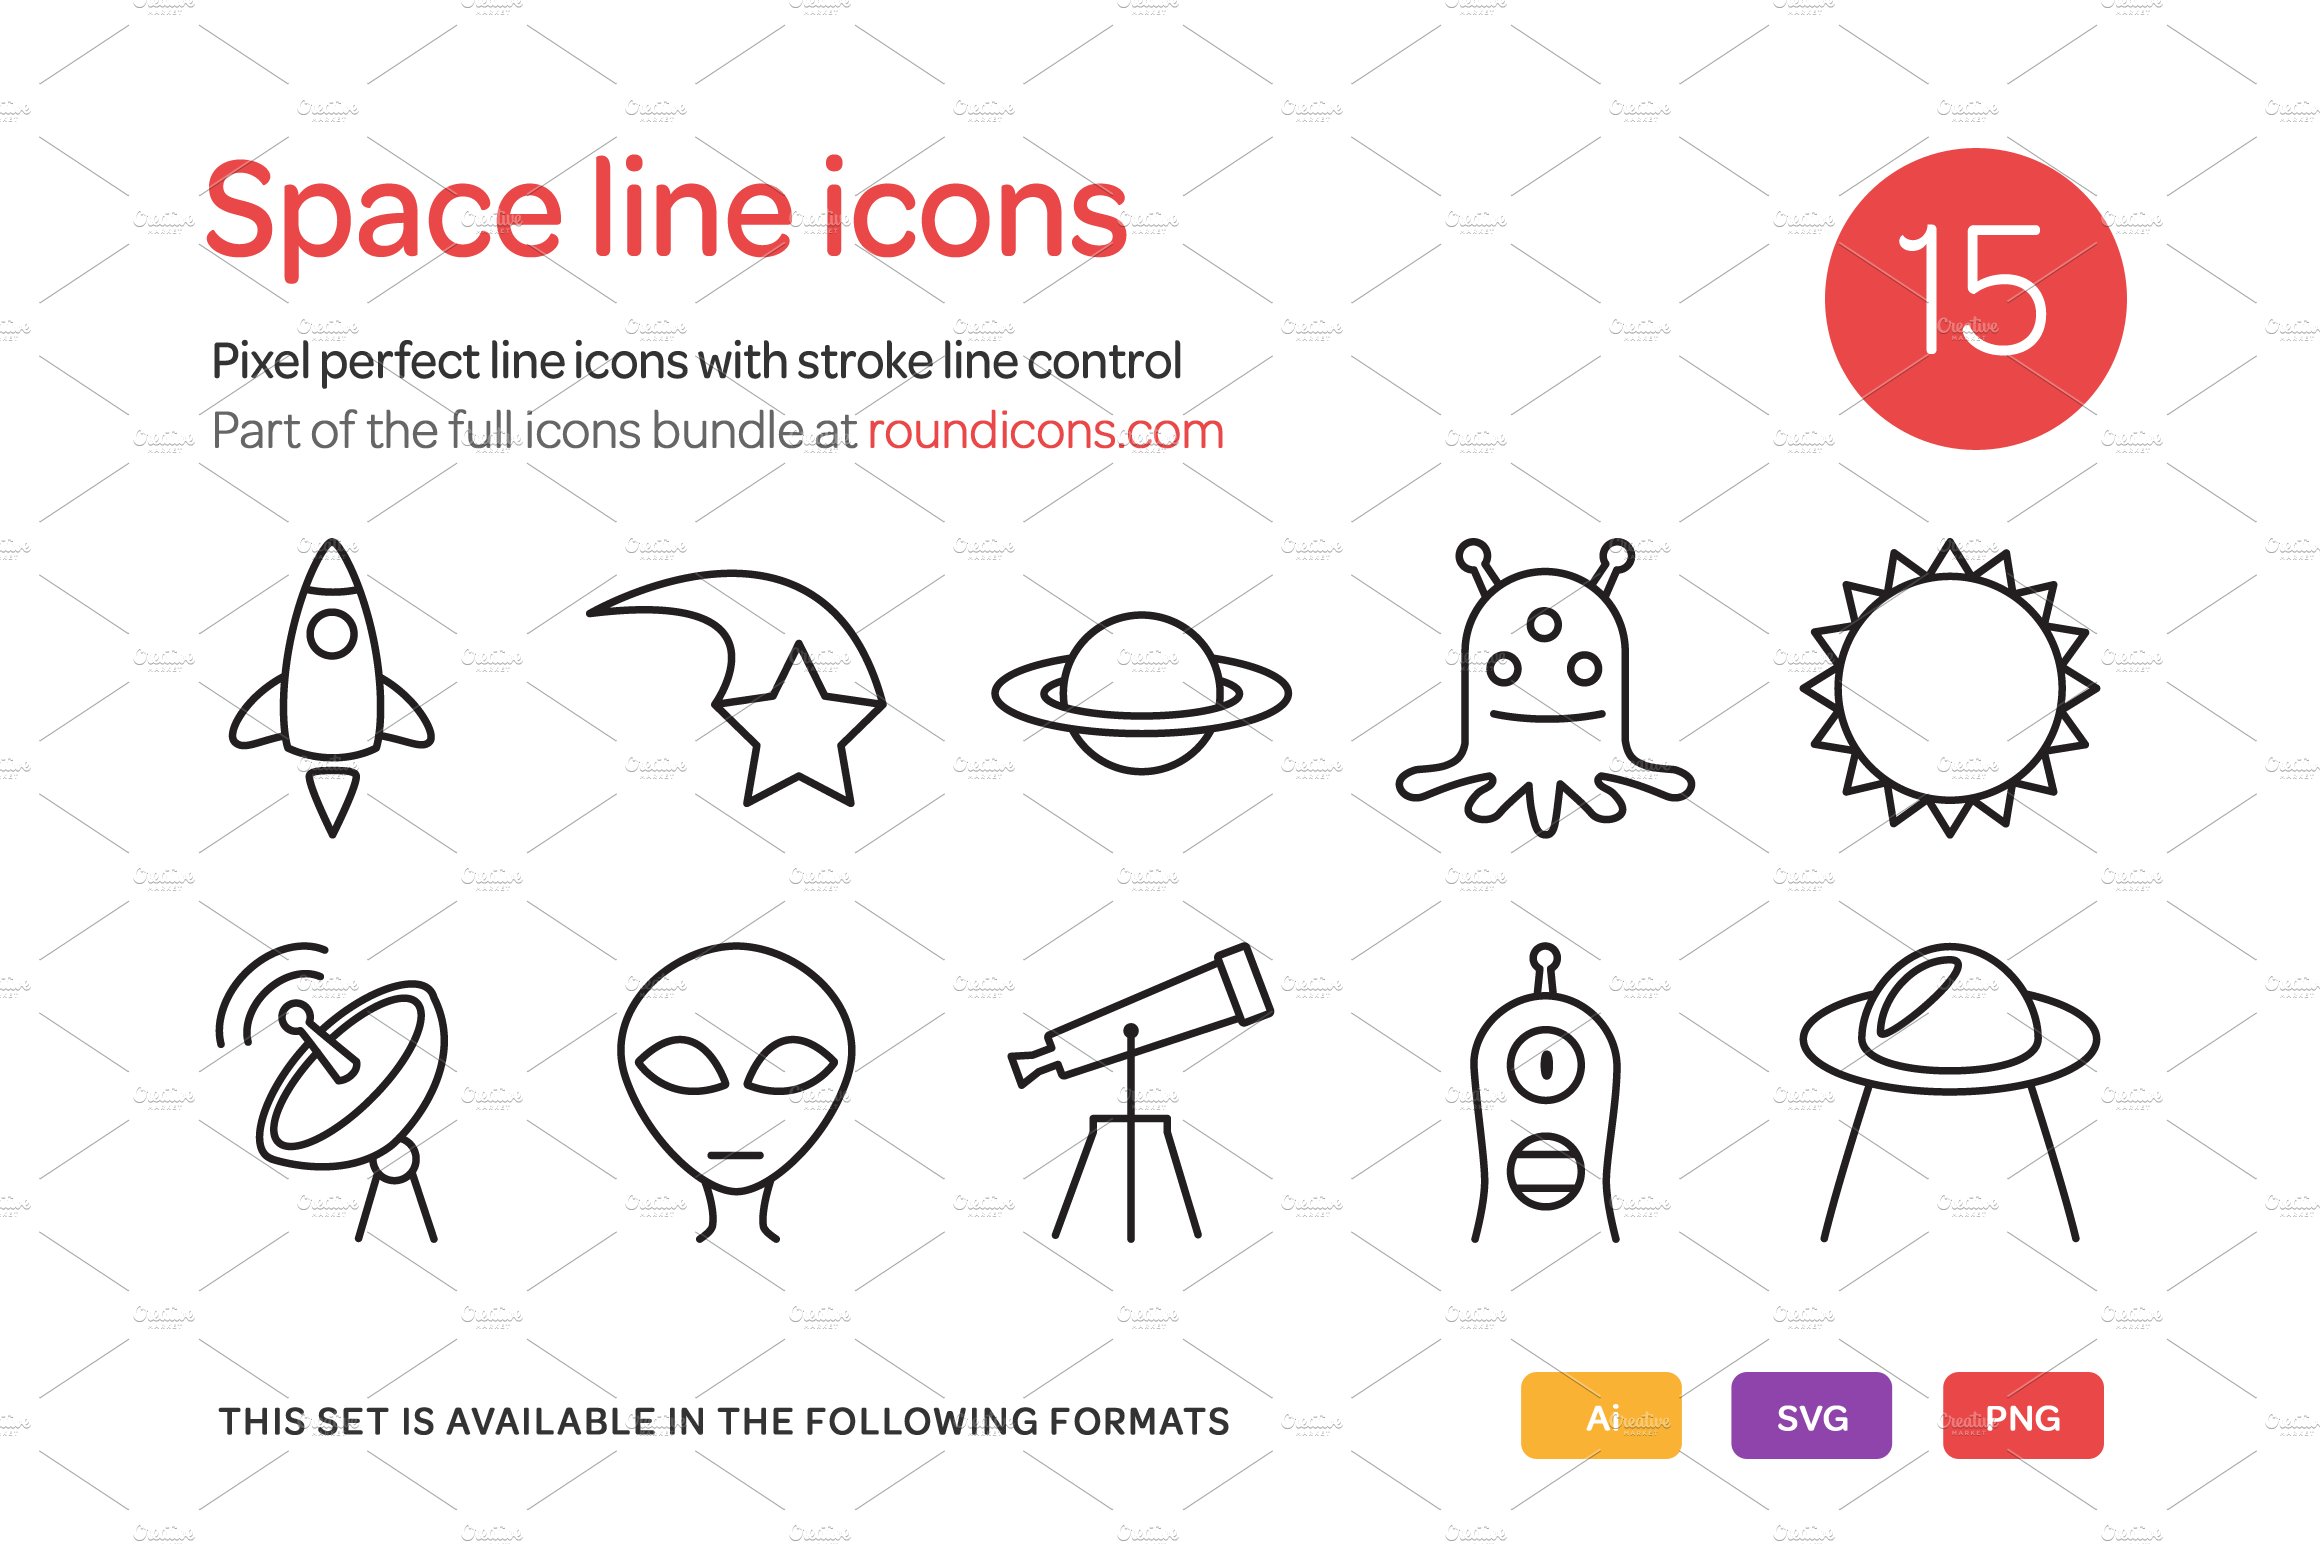 Space Line Icons Set cover image.